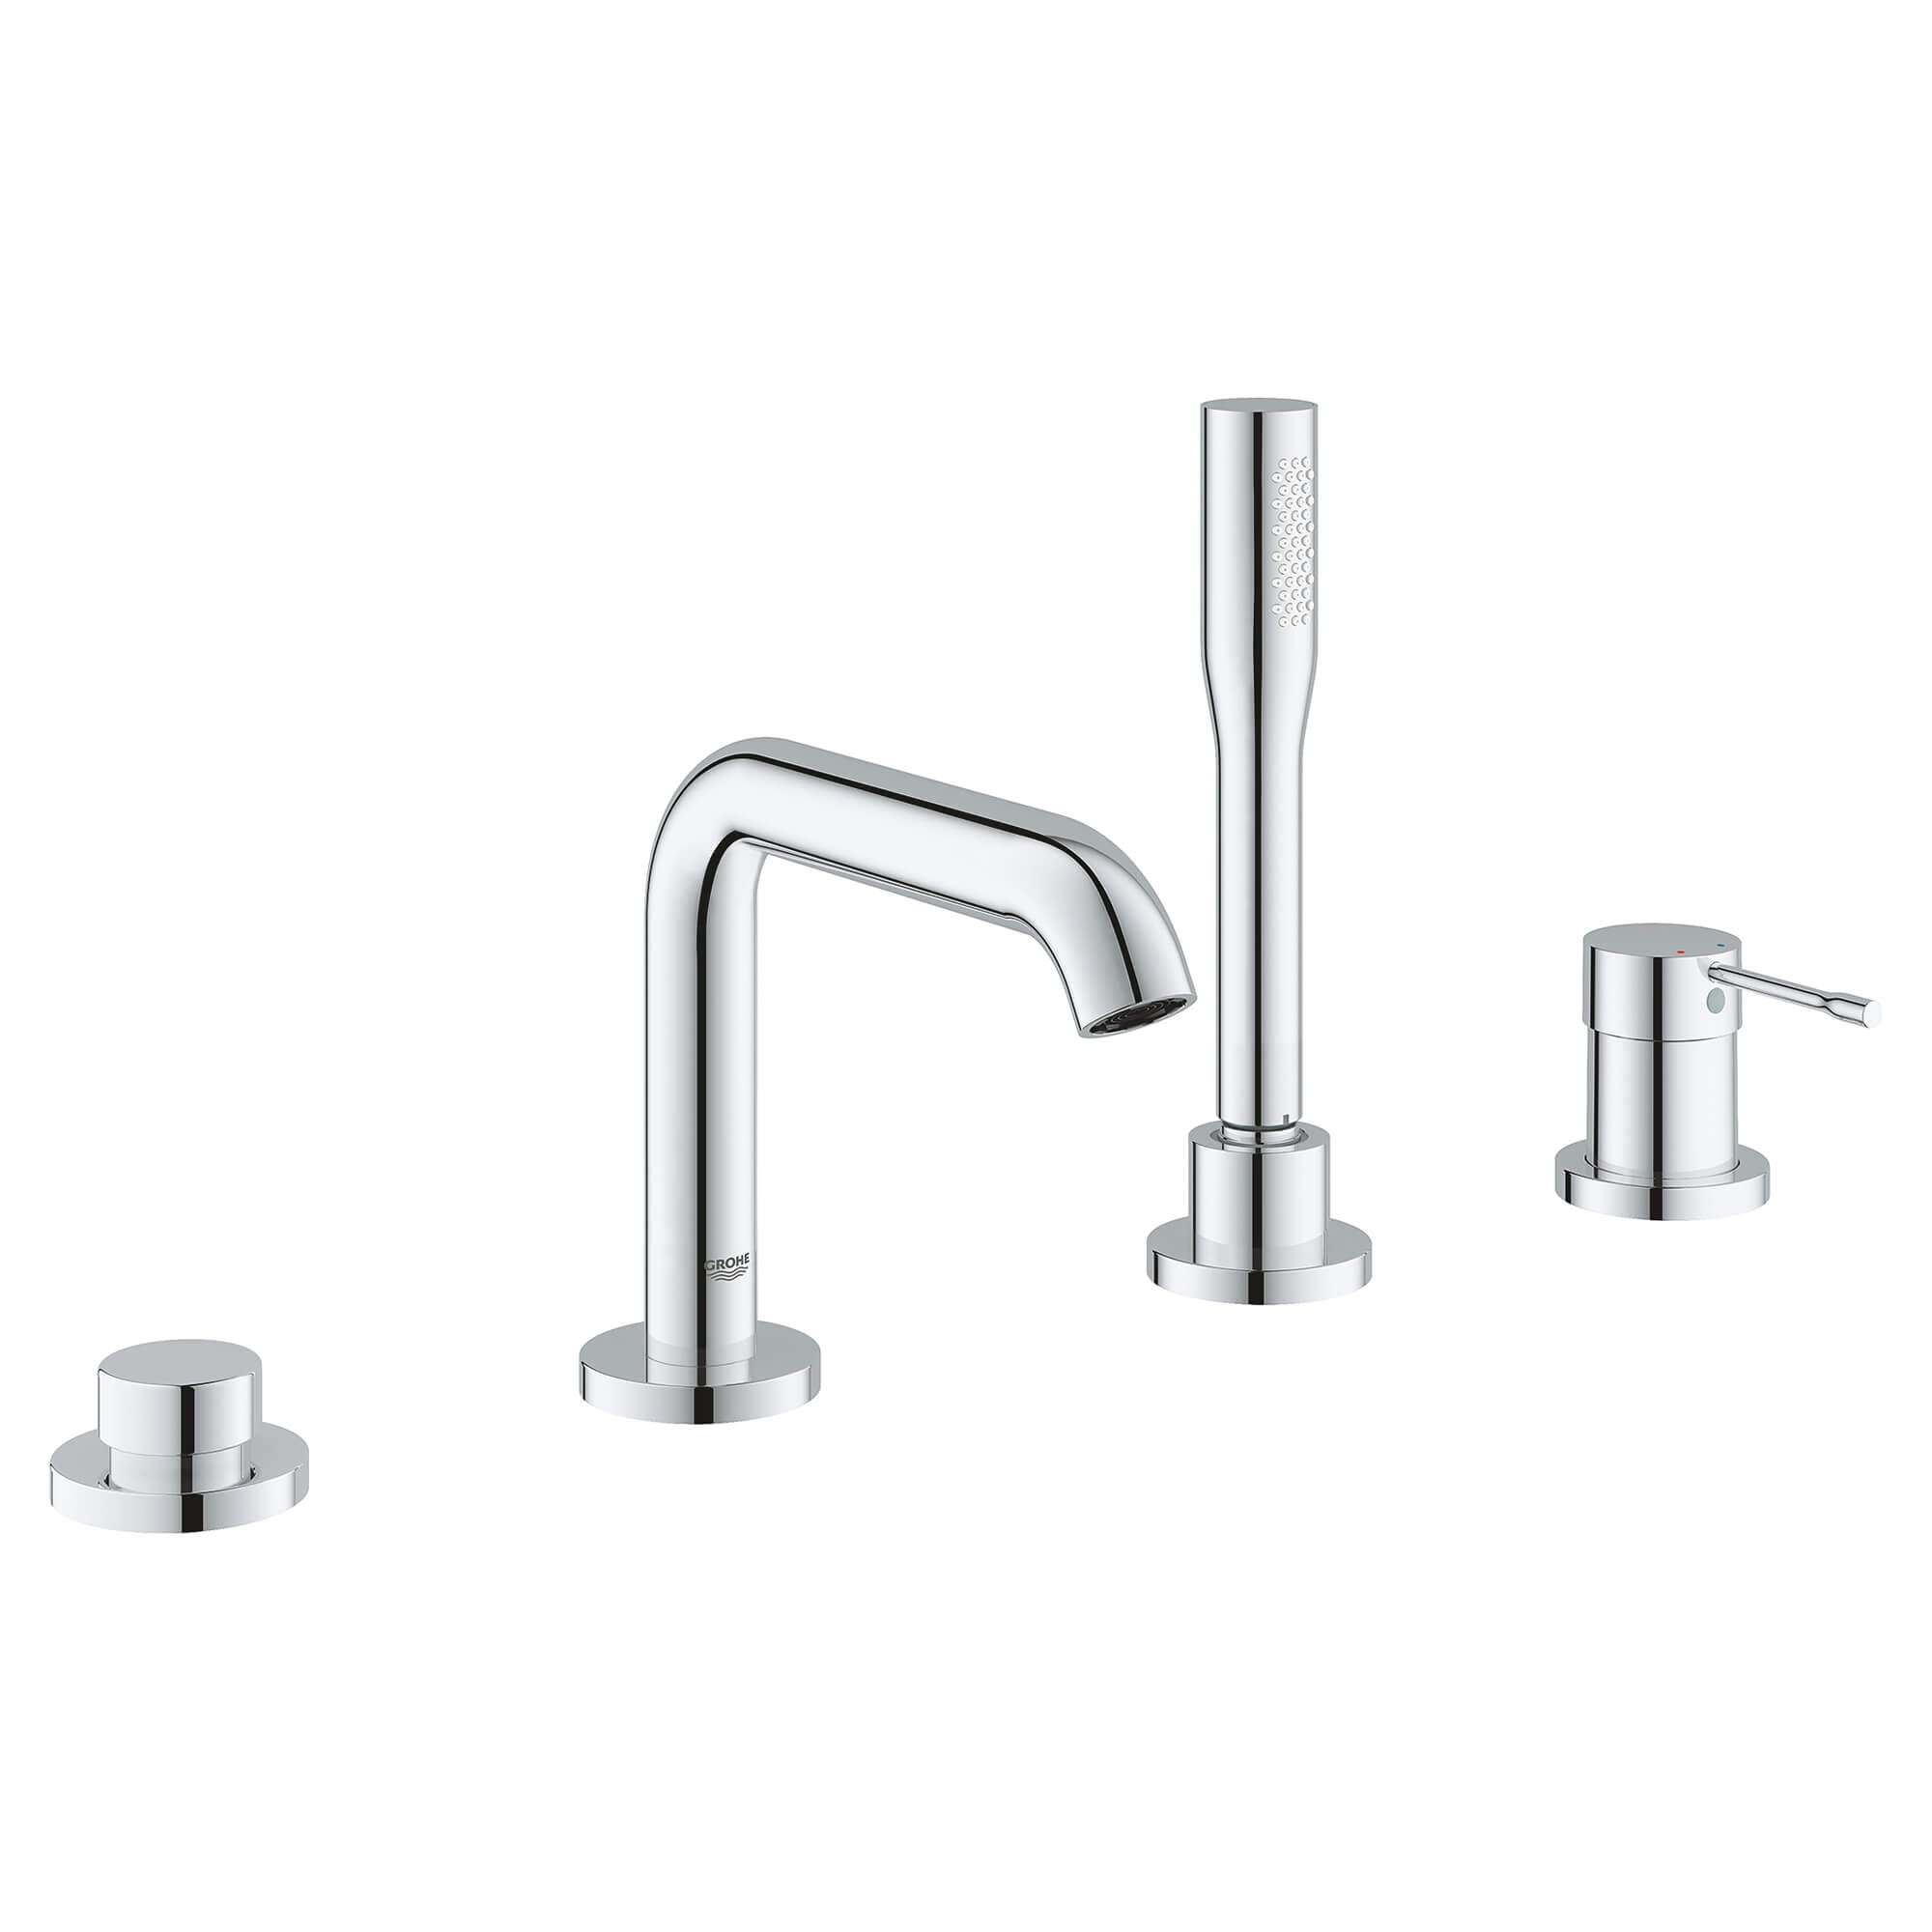 4-Hole Single-Handle Deck Mount Roman Tub Faucet with 2.0 GPM Hand Shower